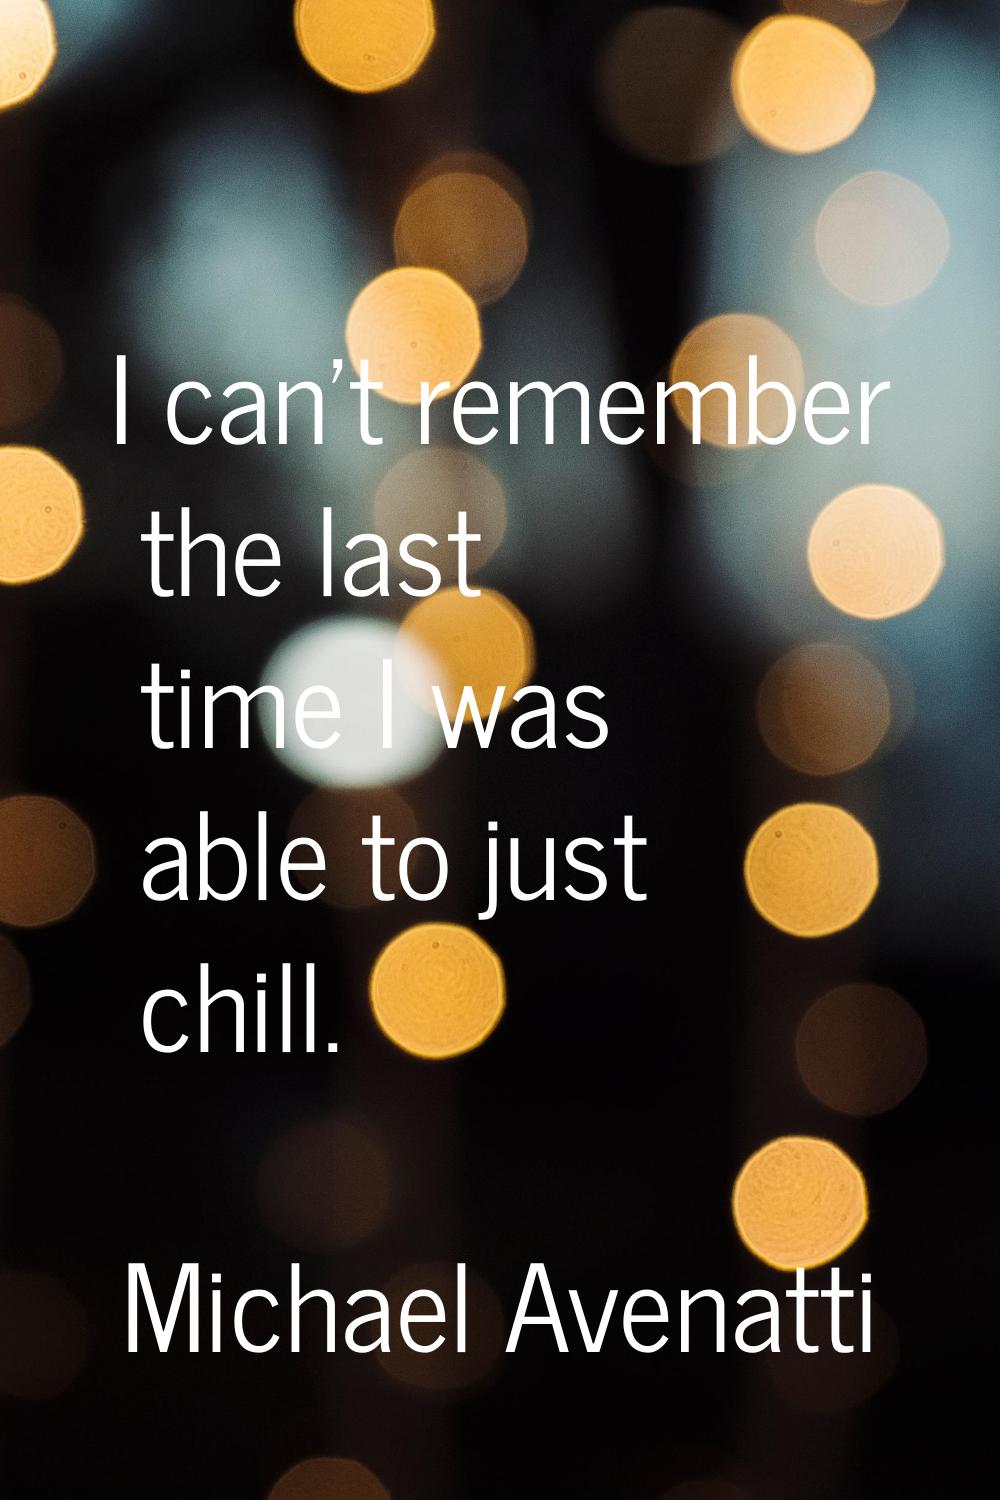 I can't remember the last time I was able to just chill.